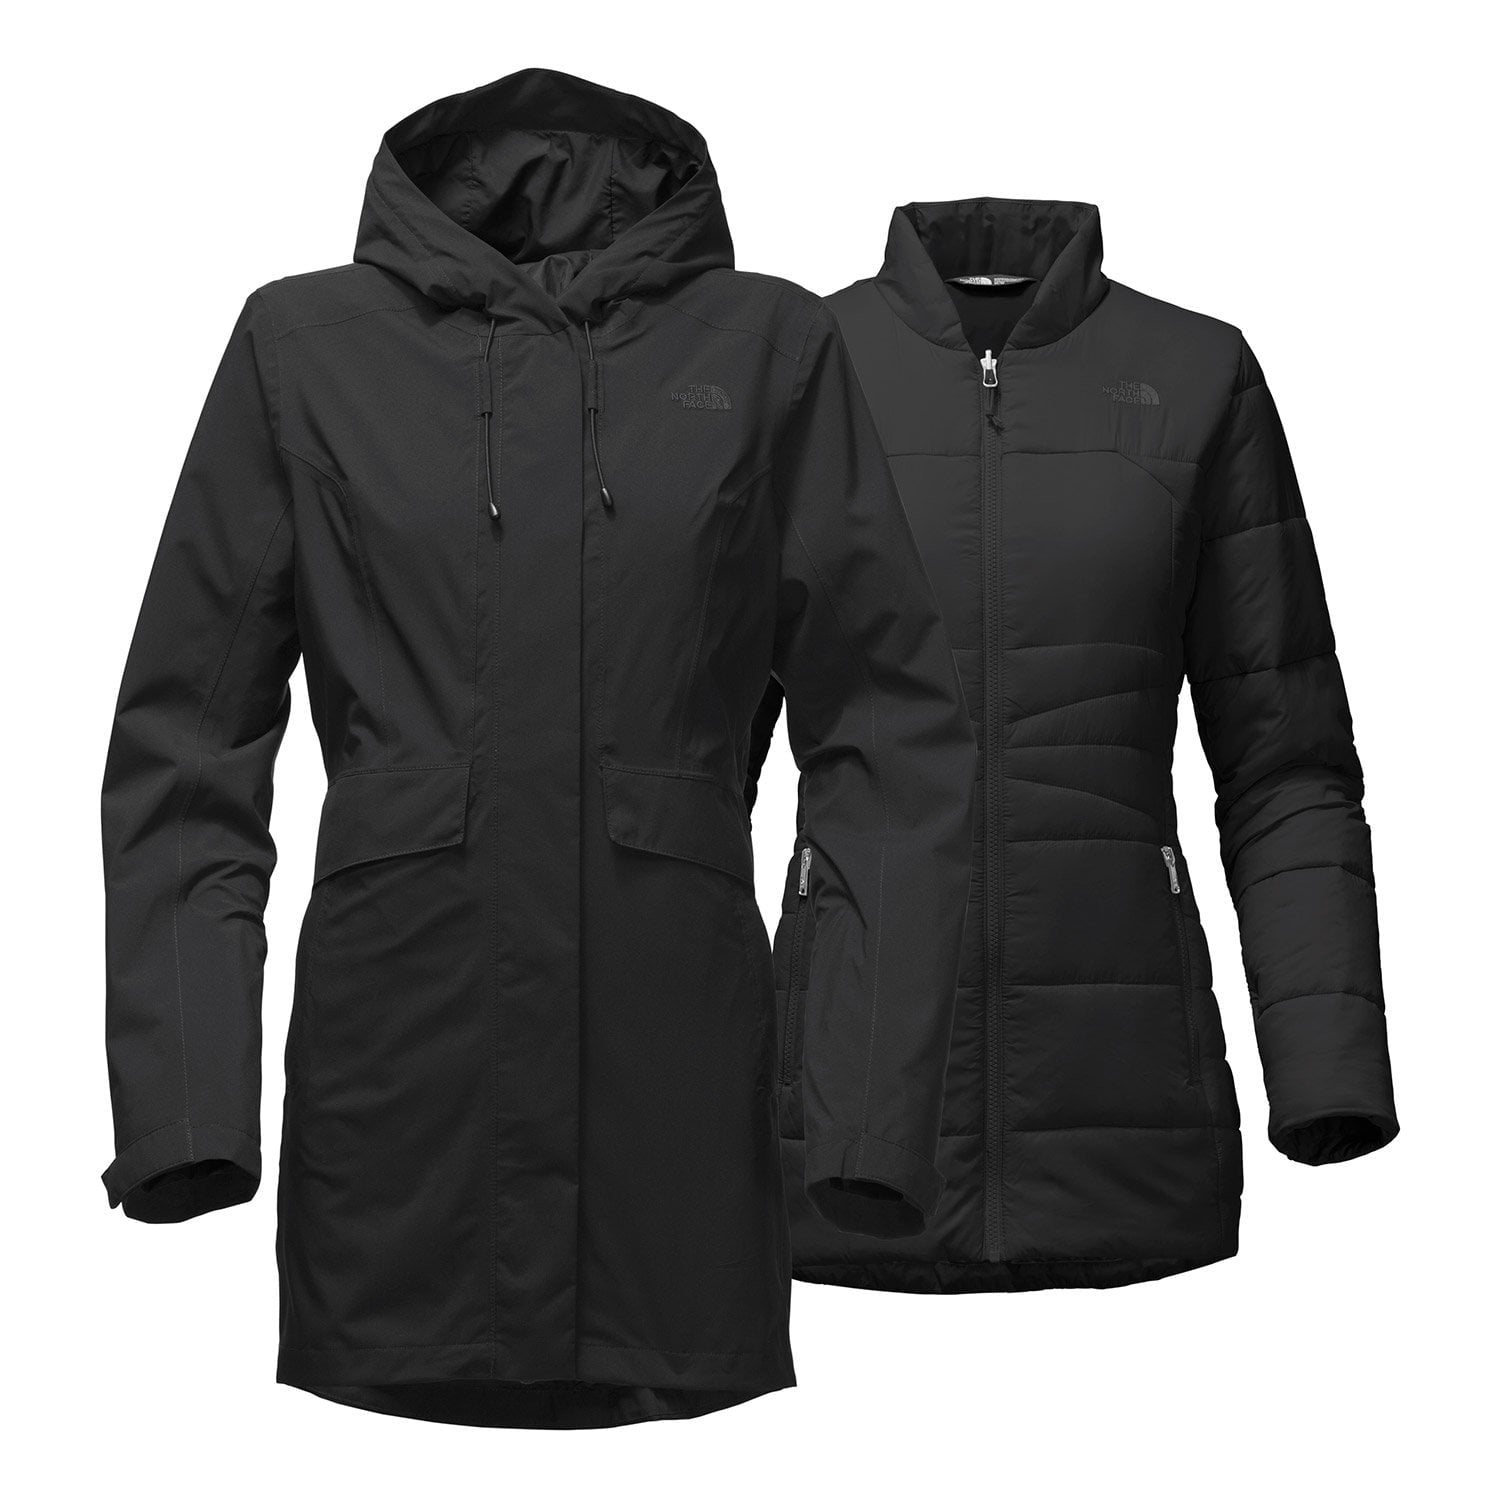 The North Face Women's Cross Boroughs Triclimate Jacket